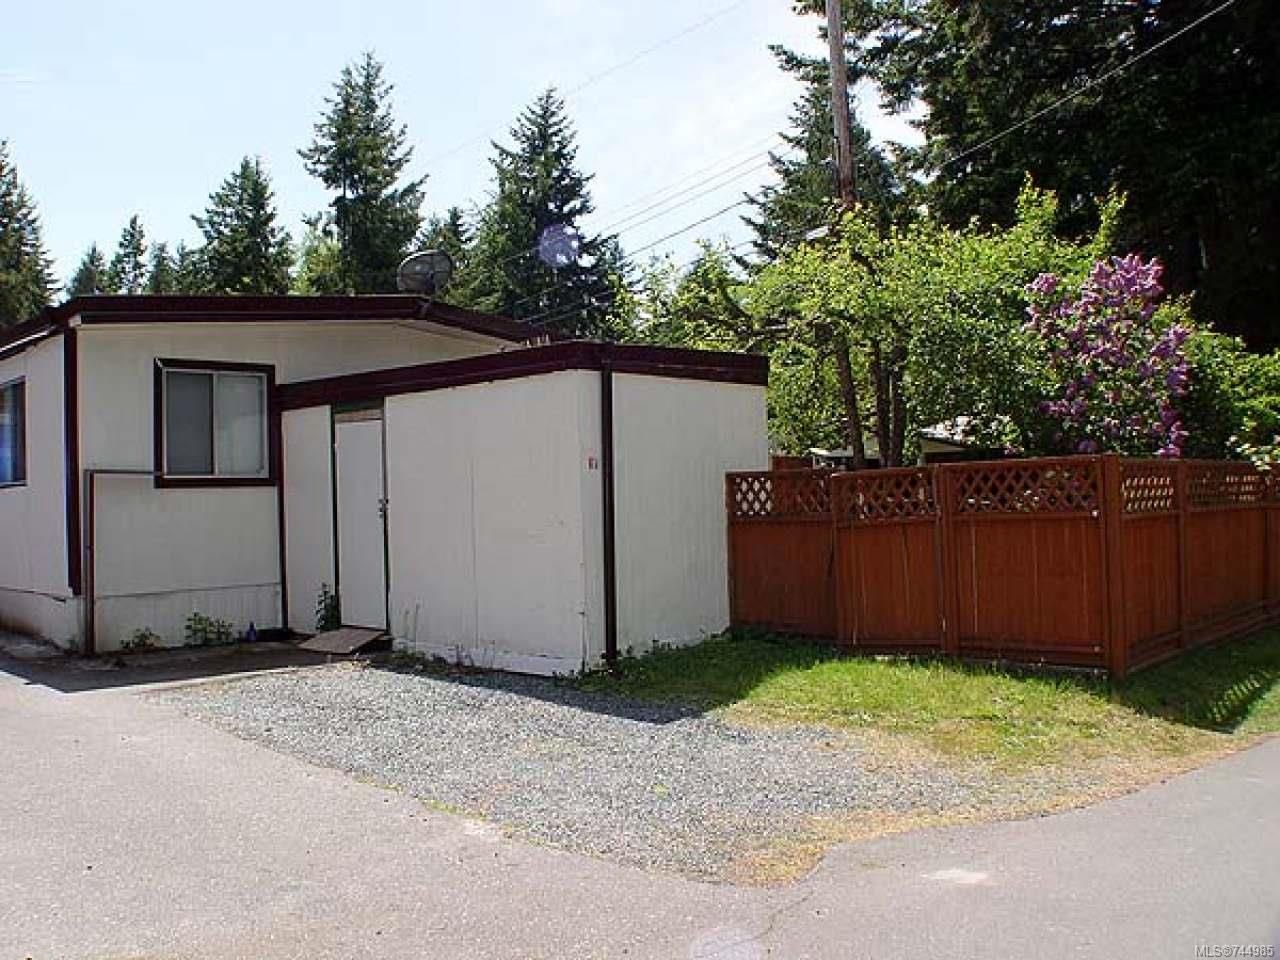 Photo 13: Photos: 67 1247 ARBUTUS ROAD in PARKSVILLE: PQ Parksville Manufactured Home for sale (Parksville/Qualicum)  : MLS®# 744985